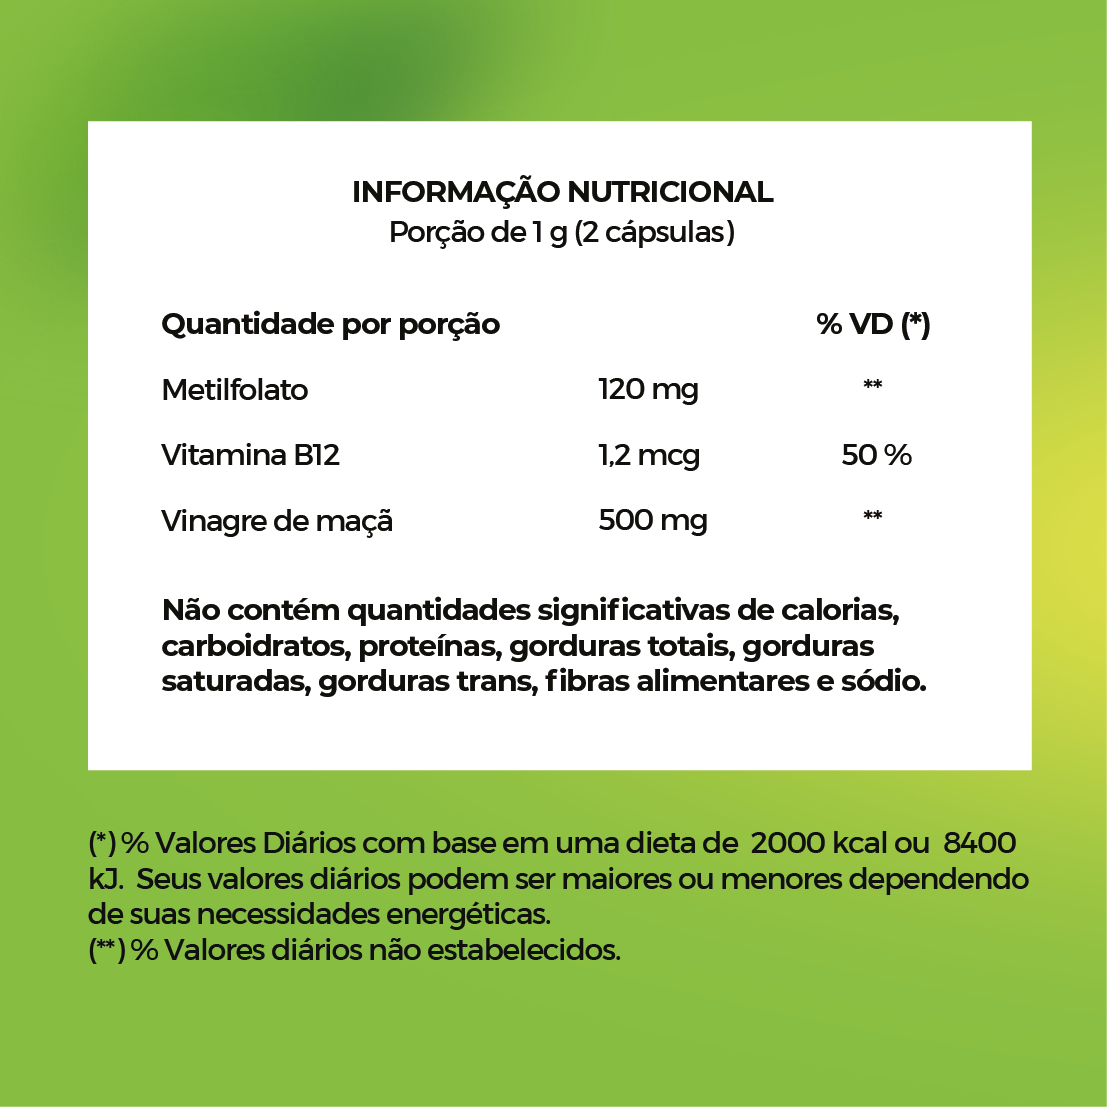 INFORMACAO_NUTRICIONAL_MAMA_FIT_97e012b5-7b65-4718-afd6-a890740ebfc8.png